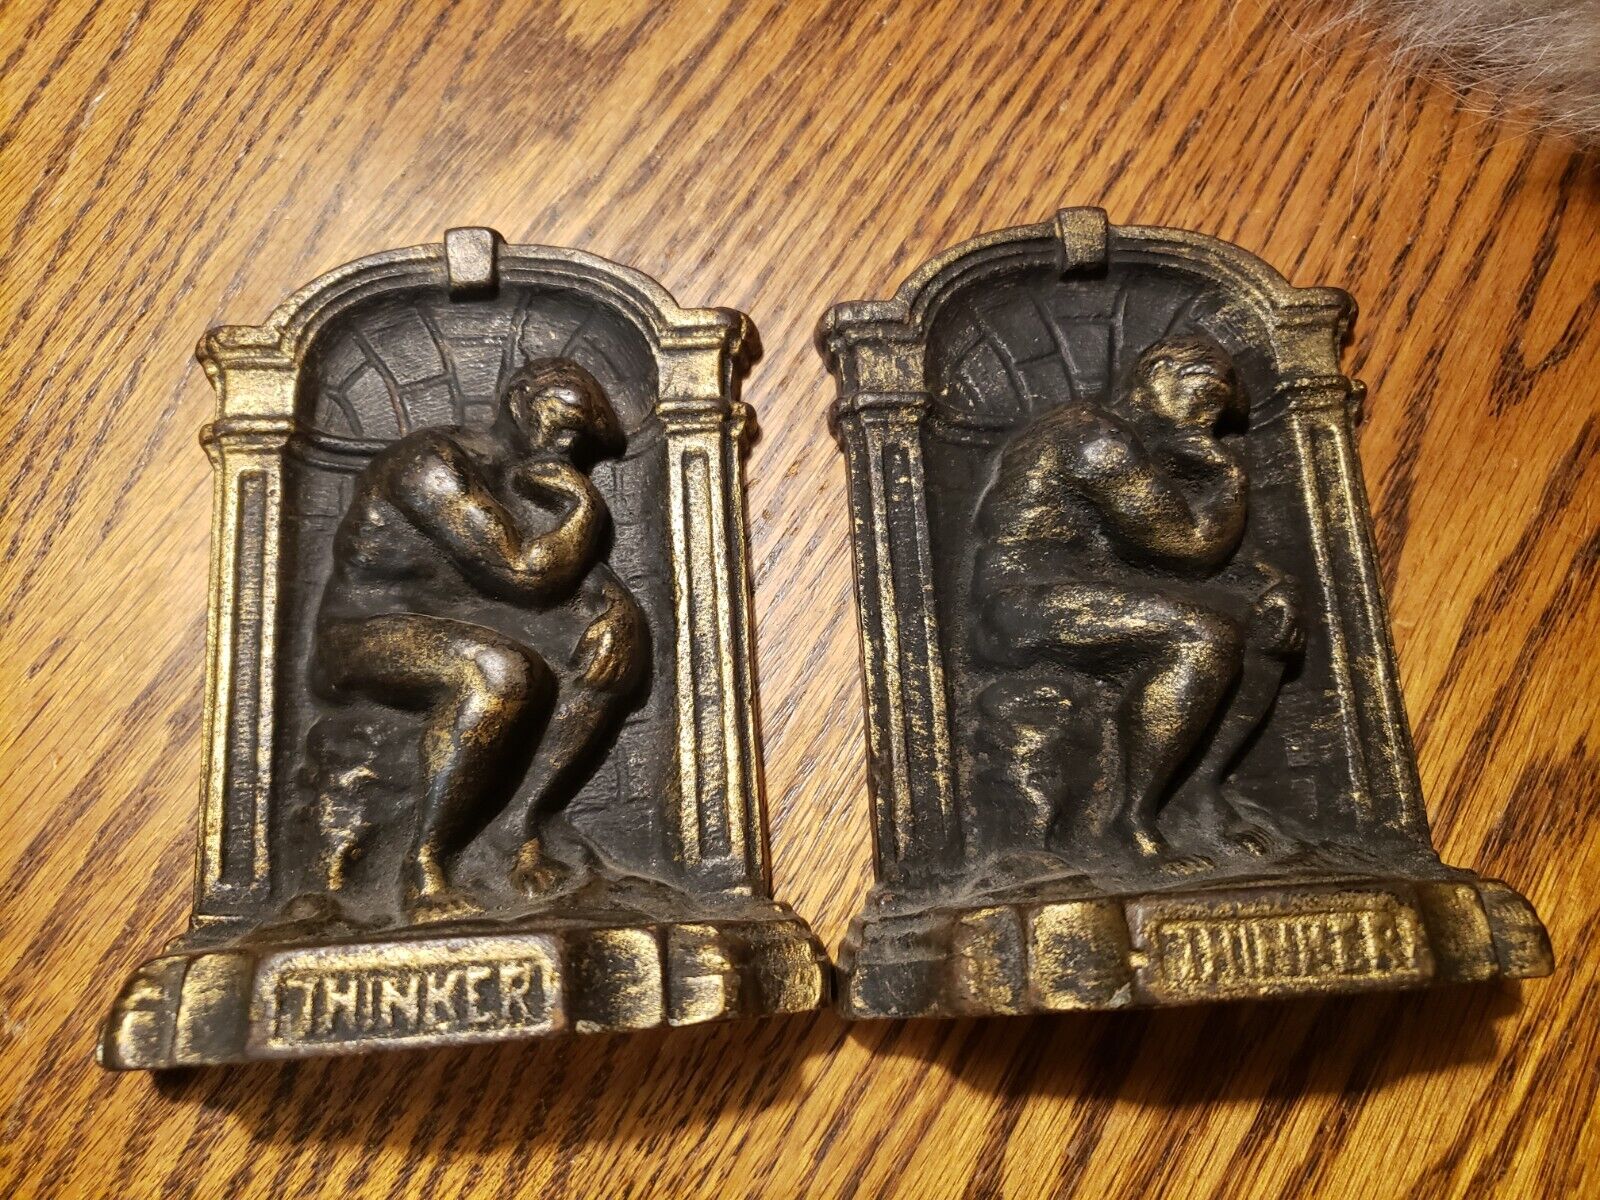 Vintage Bronzed Cast Metal Rodin’s The Thinker Decorative Bookends